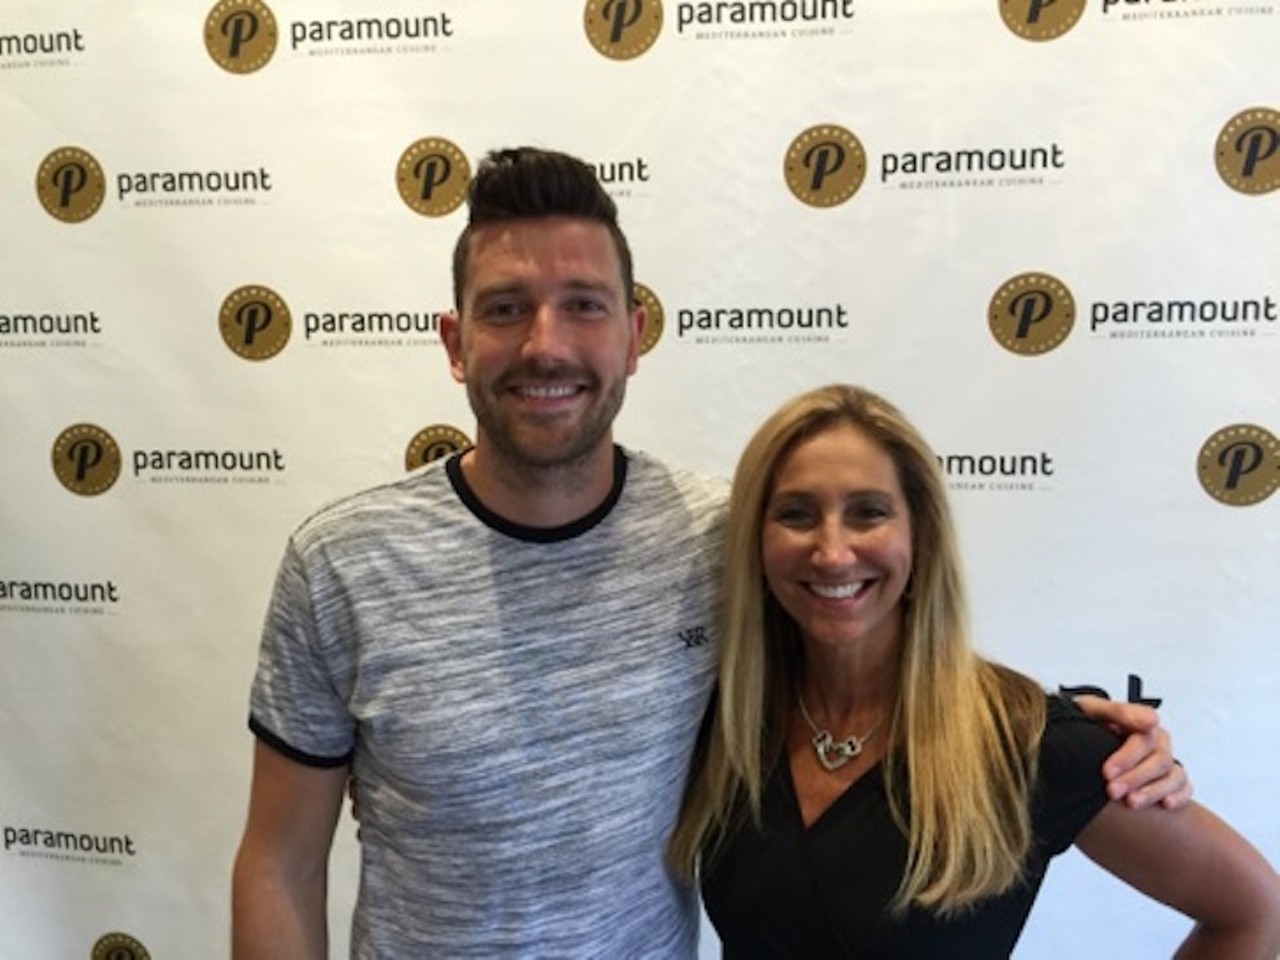 Promo: 12 photos from Paramount Fine Food's grand opening